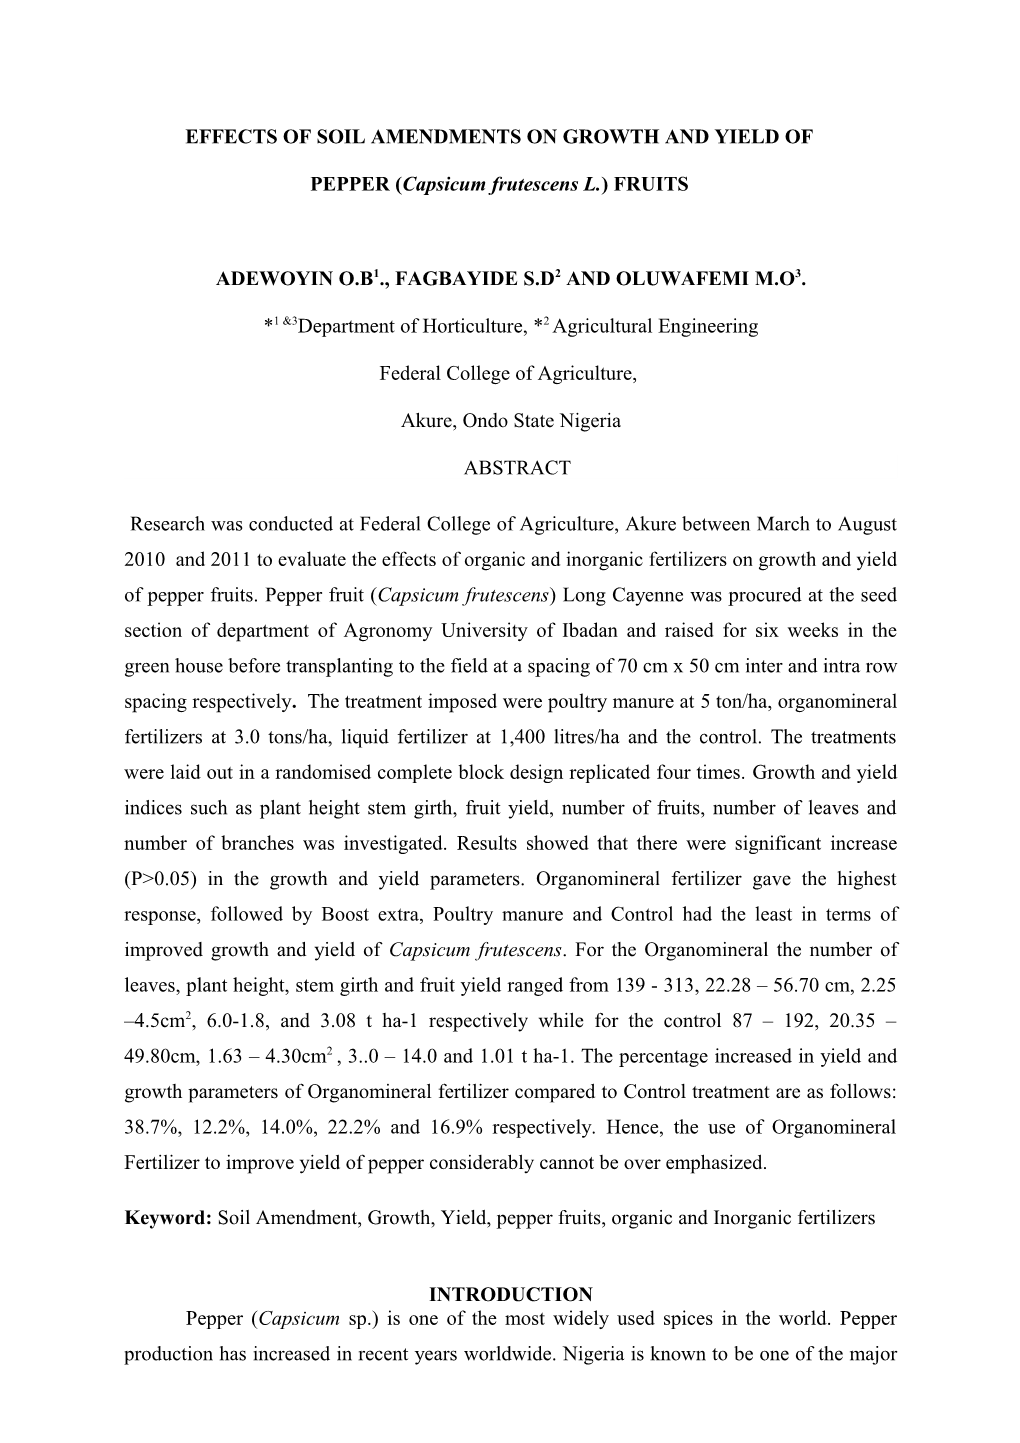 EFFECTS of SOIL AMENDMENTS on GROWTH and YIELD of PEPPER (Capsicum Frutescens L.) FRUITS